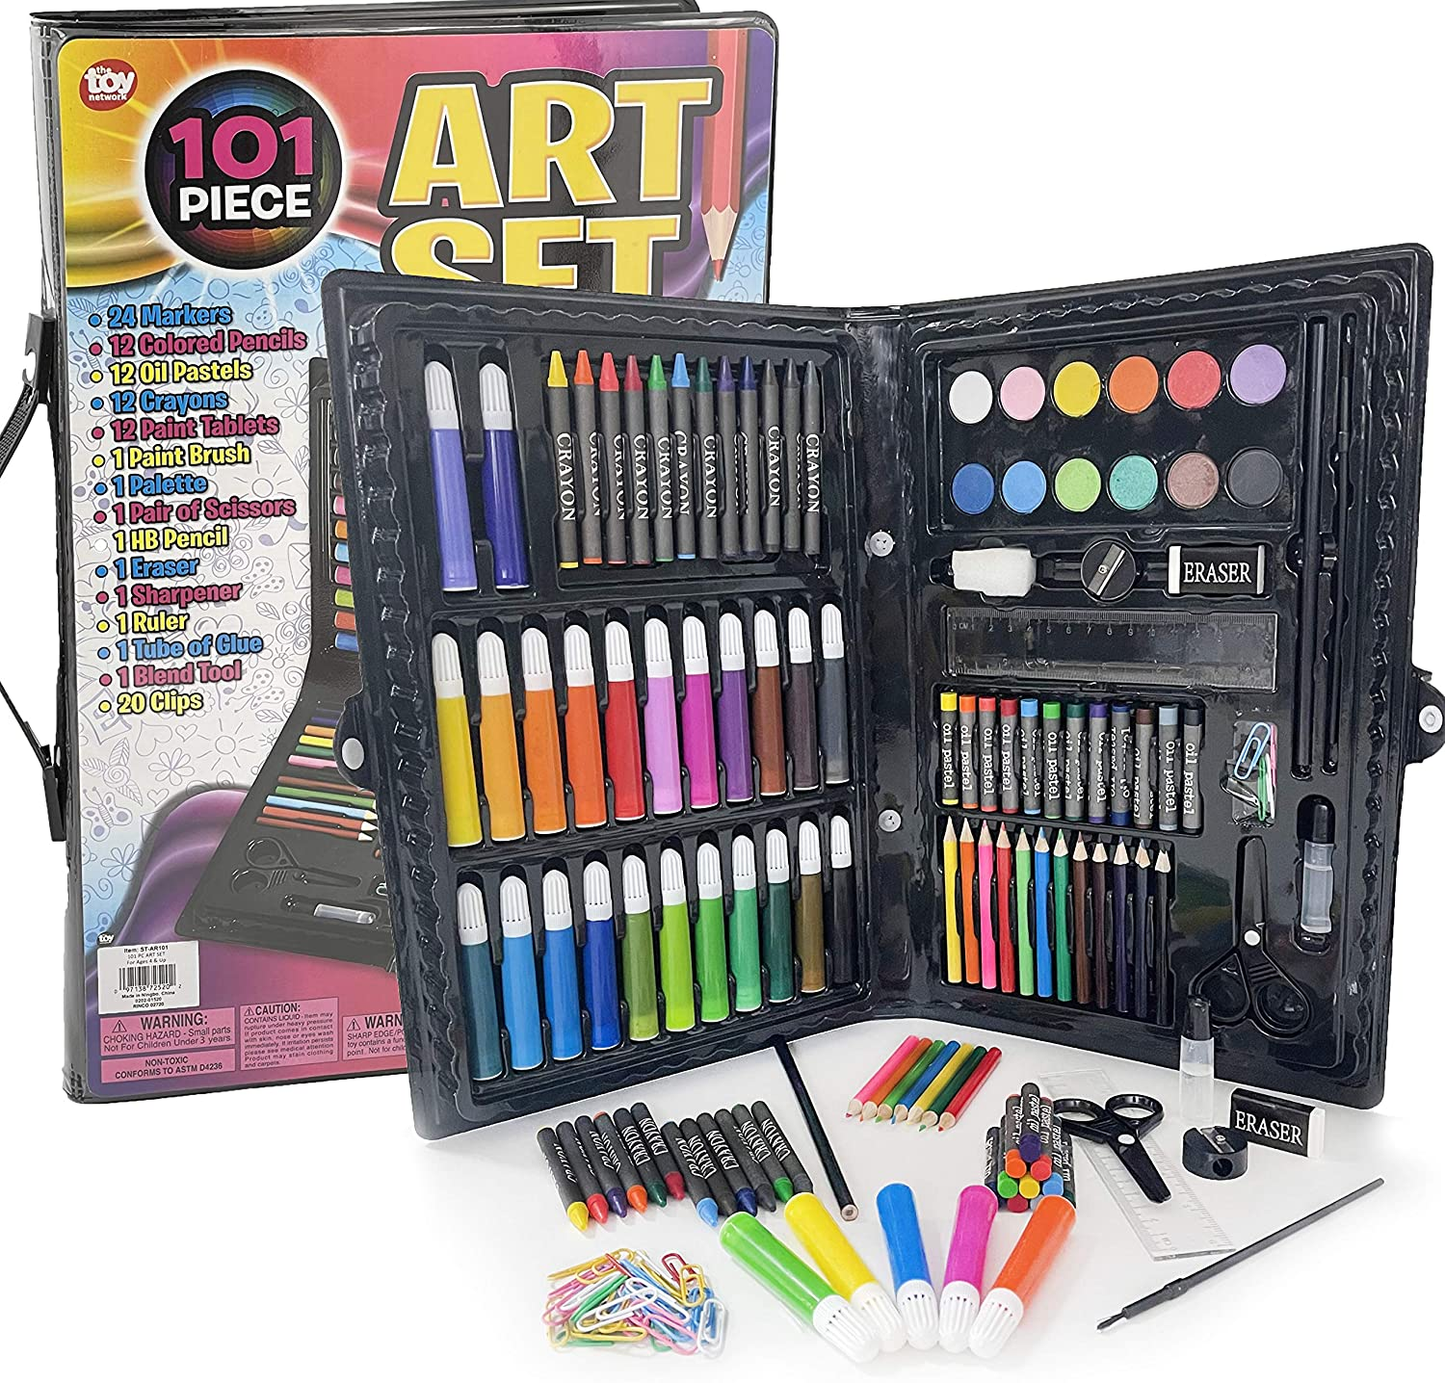 Deluxe Art Set 101 Piece Includes Watercolor, Crayons, Colored Markers, Color Pencils, Ruler, and More